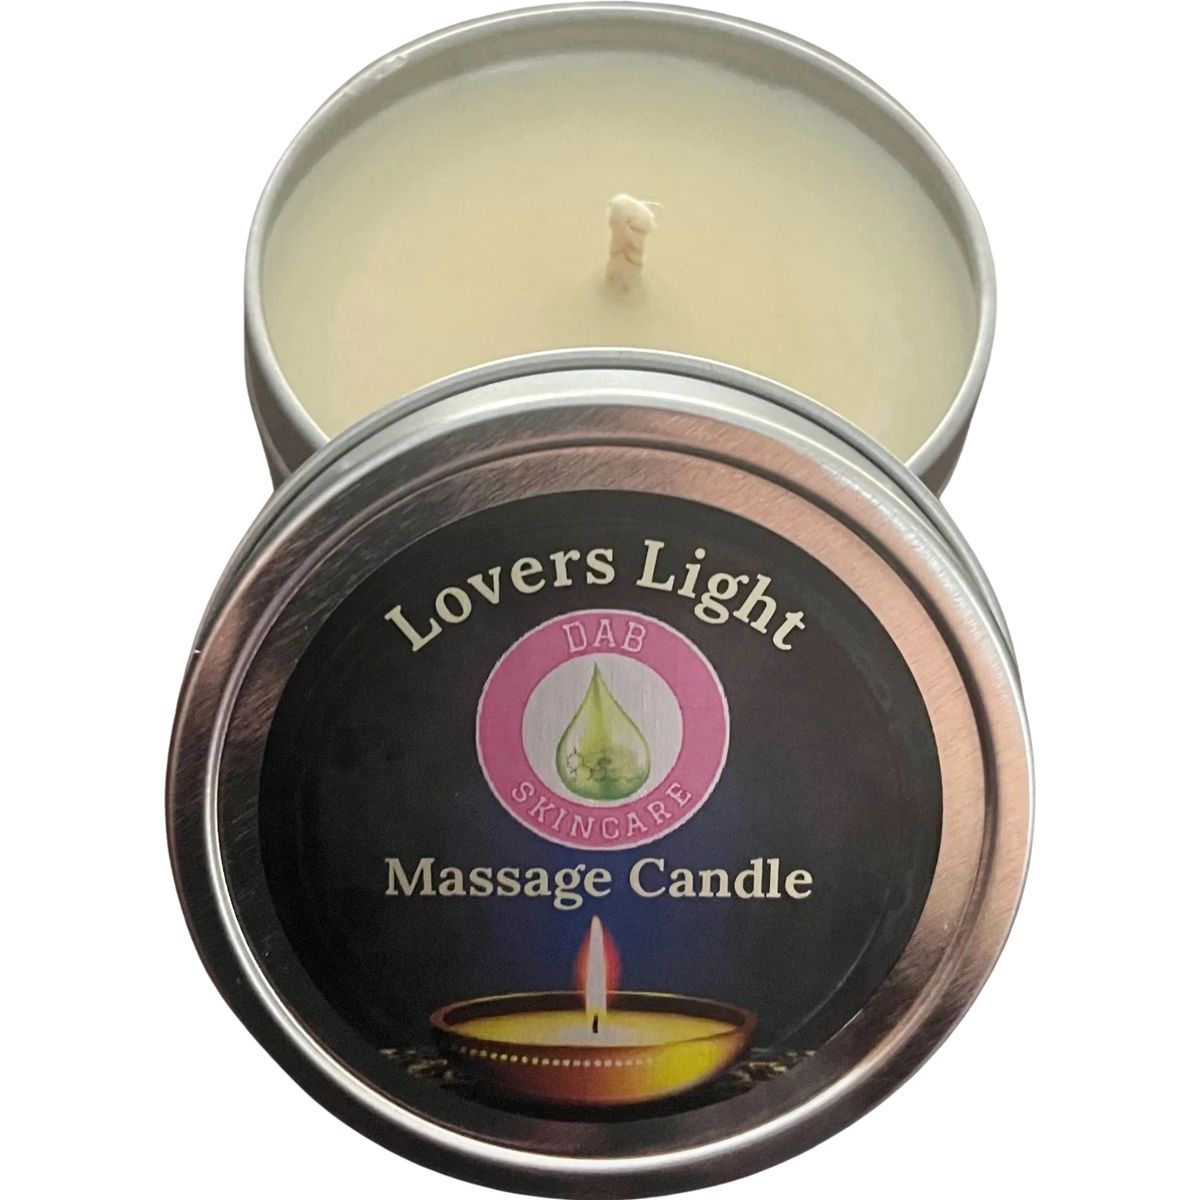 Massage Candle - NuVGN Soaps and Body Works LLC